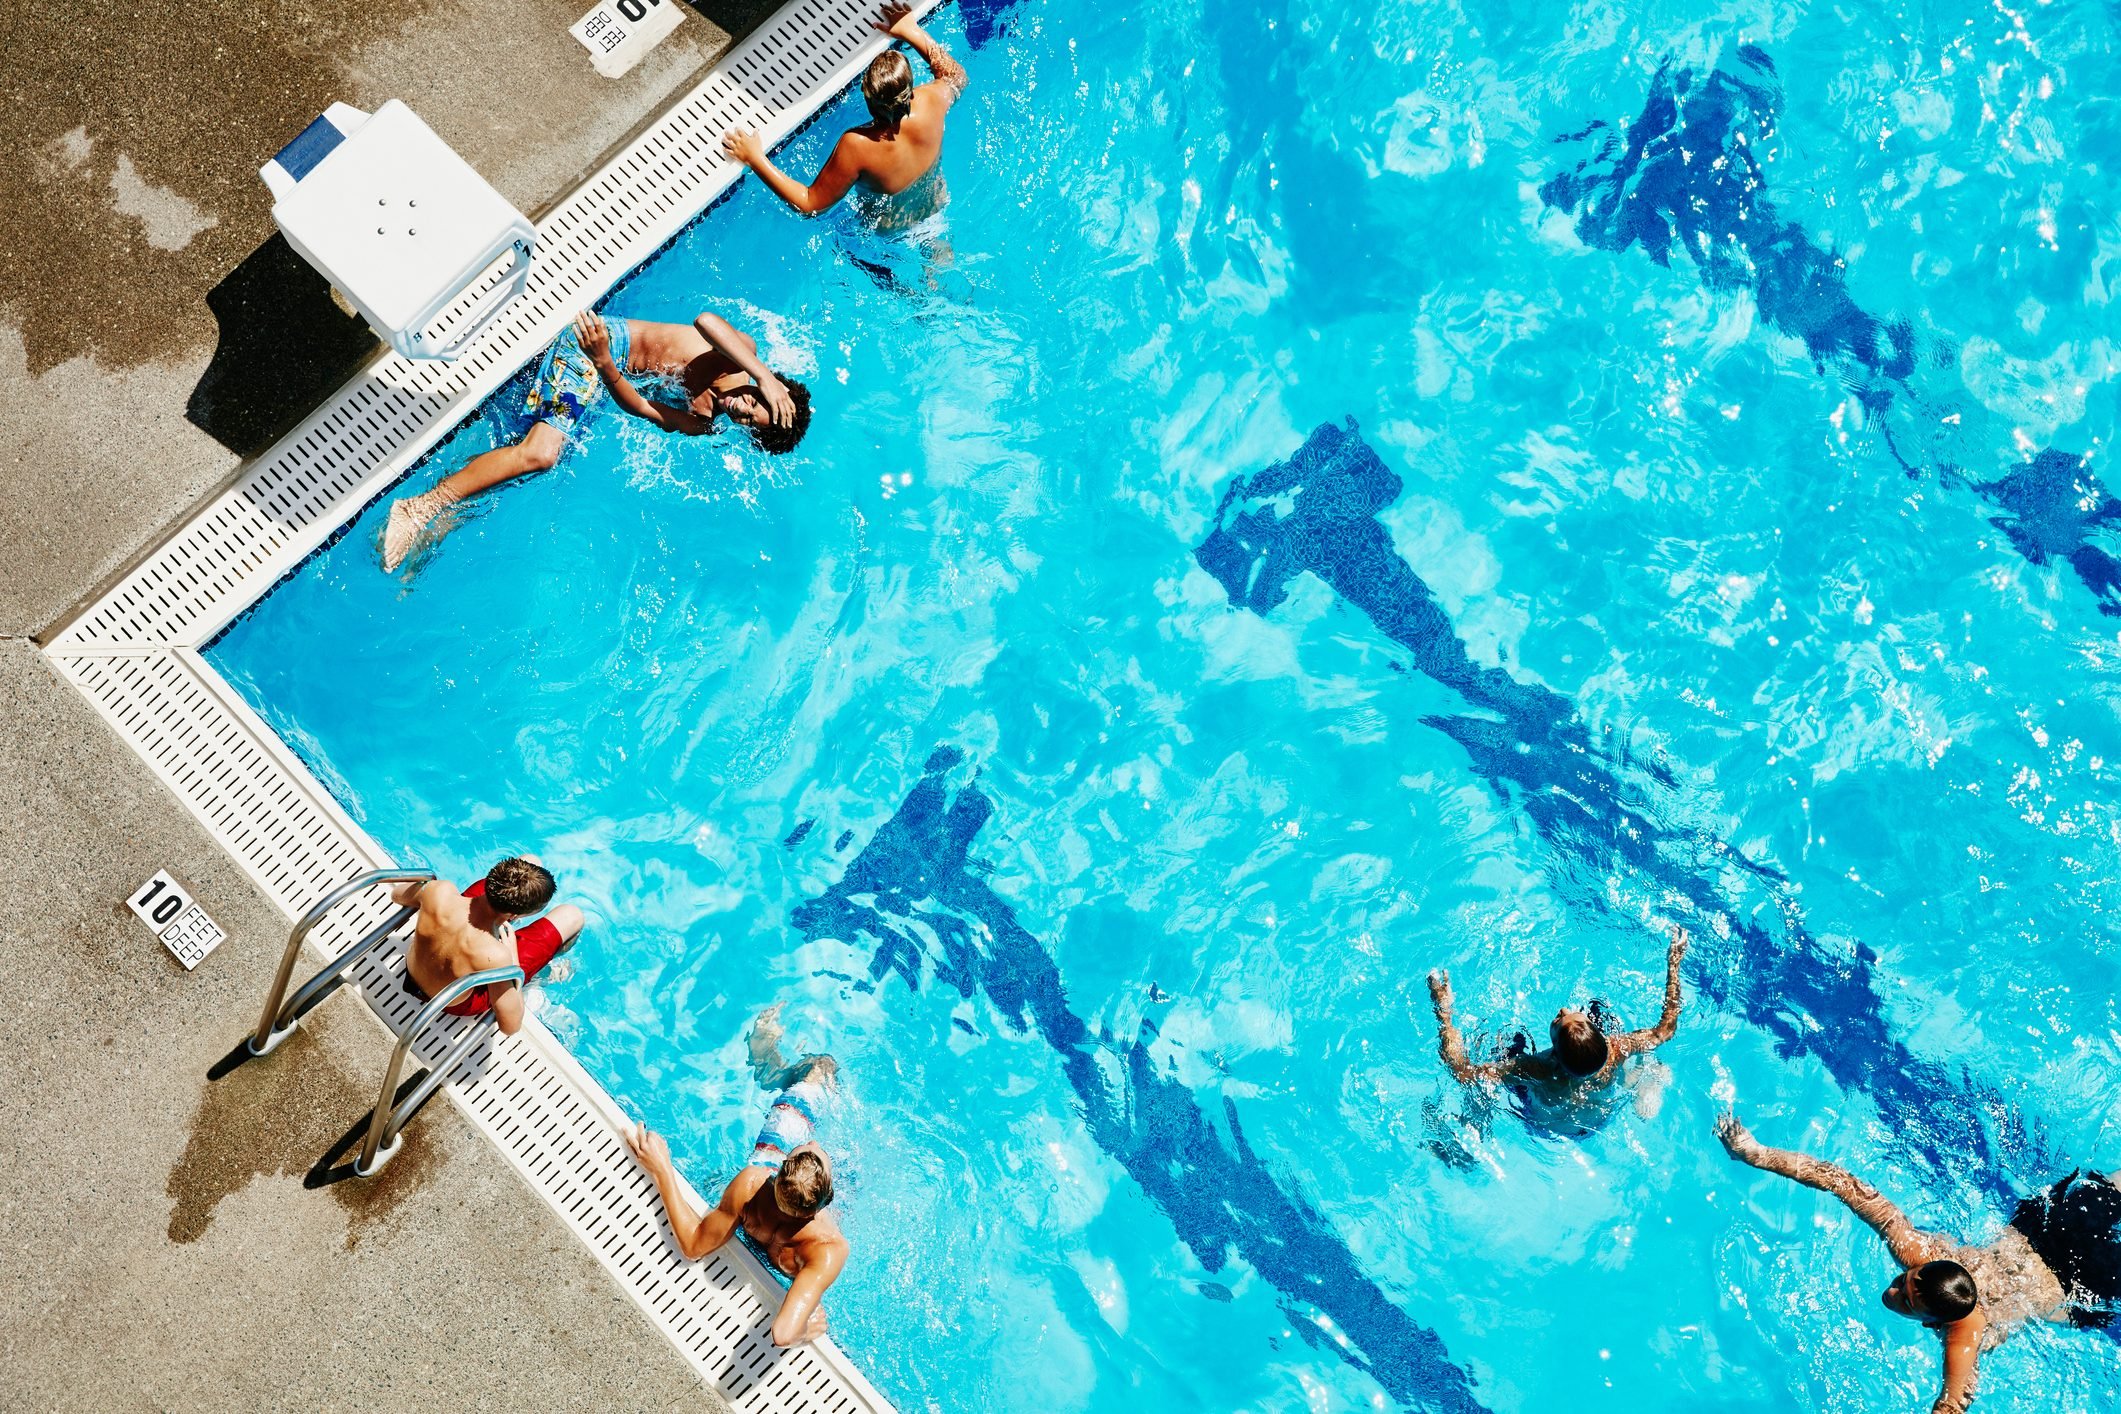 Peeing in the Pool Isn't Just Gross—It's Actually Bad for You